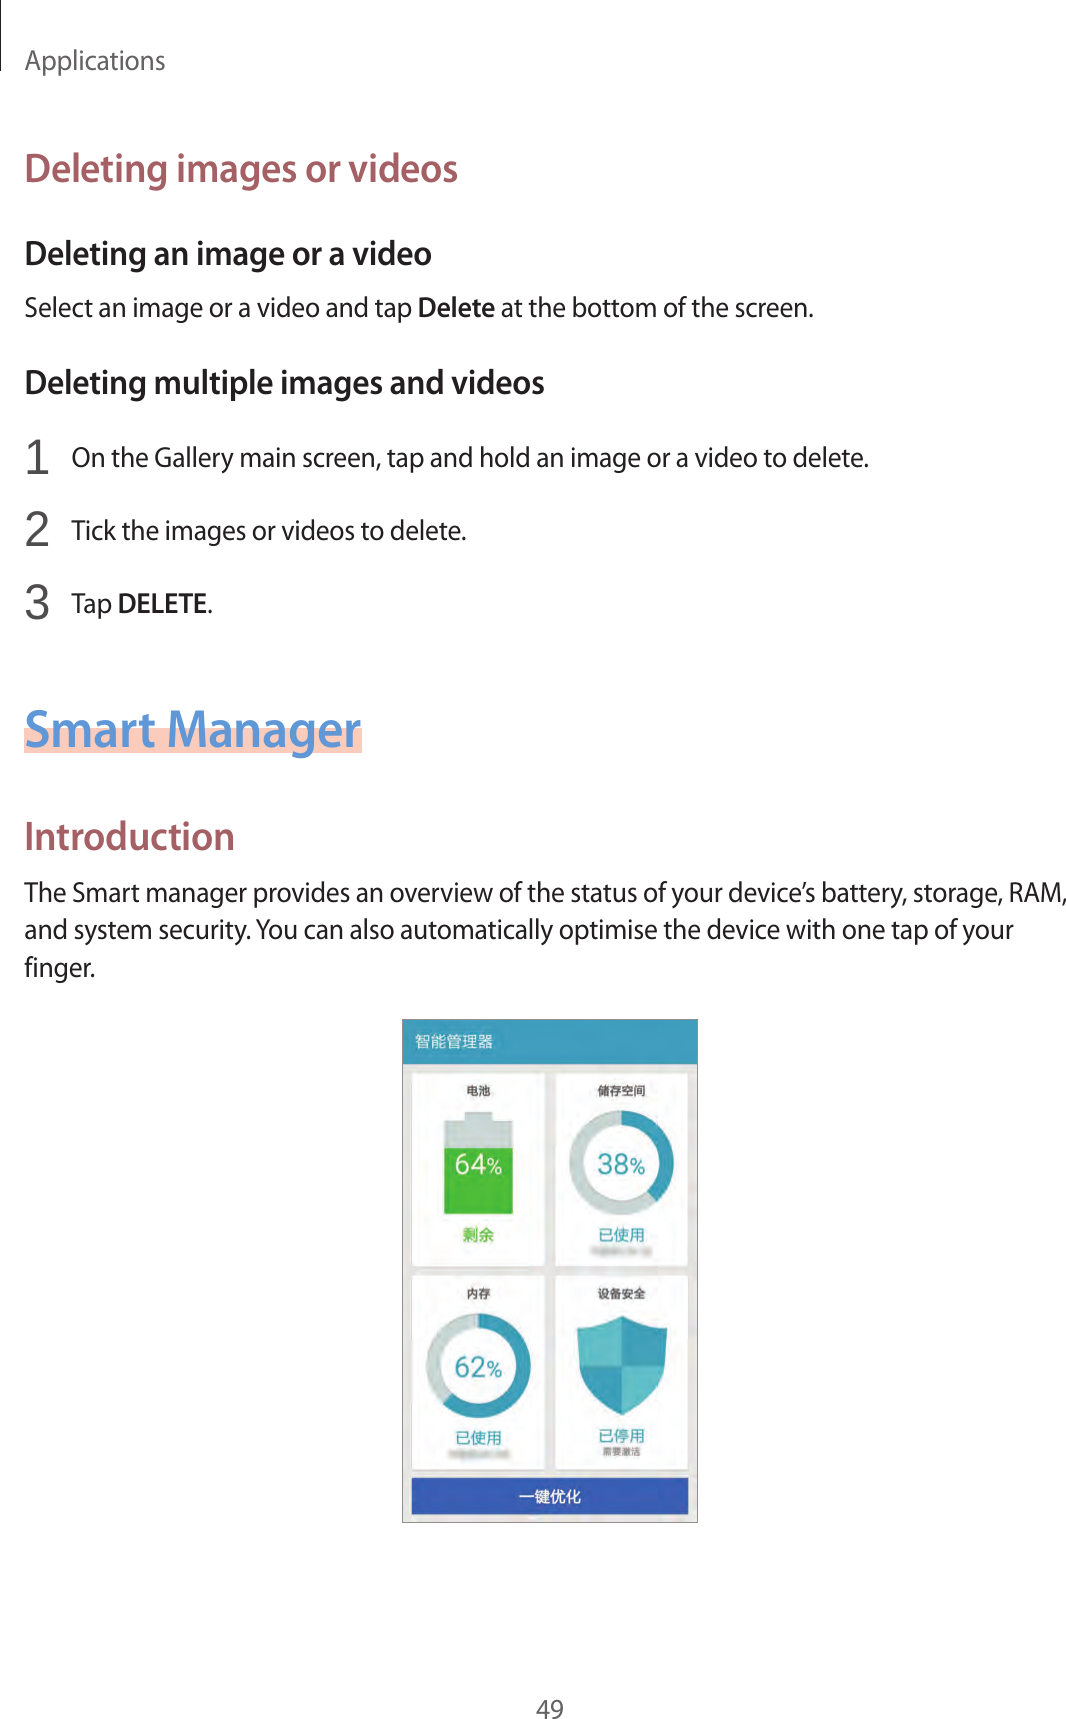 Applications49Deleting images or videosDeleting an image or a videoSelect an image or a video and tap Delete at the bottom of the screen.Deleting multiple images and videos1  On the Gallery main screen, tap and hold an image or a video to delete.2  Tick the images or videos to delete.3  Tap DELETE.Smart ManagerIntroductionThe Smart manager provides an overview of the status of your device’s battery, storage, RAM, and system security. You can also automatically optimise the device with one tap of your finger.